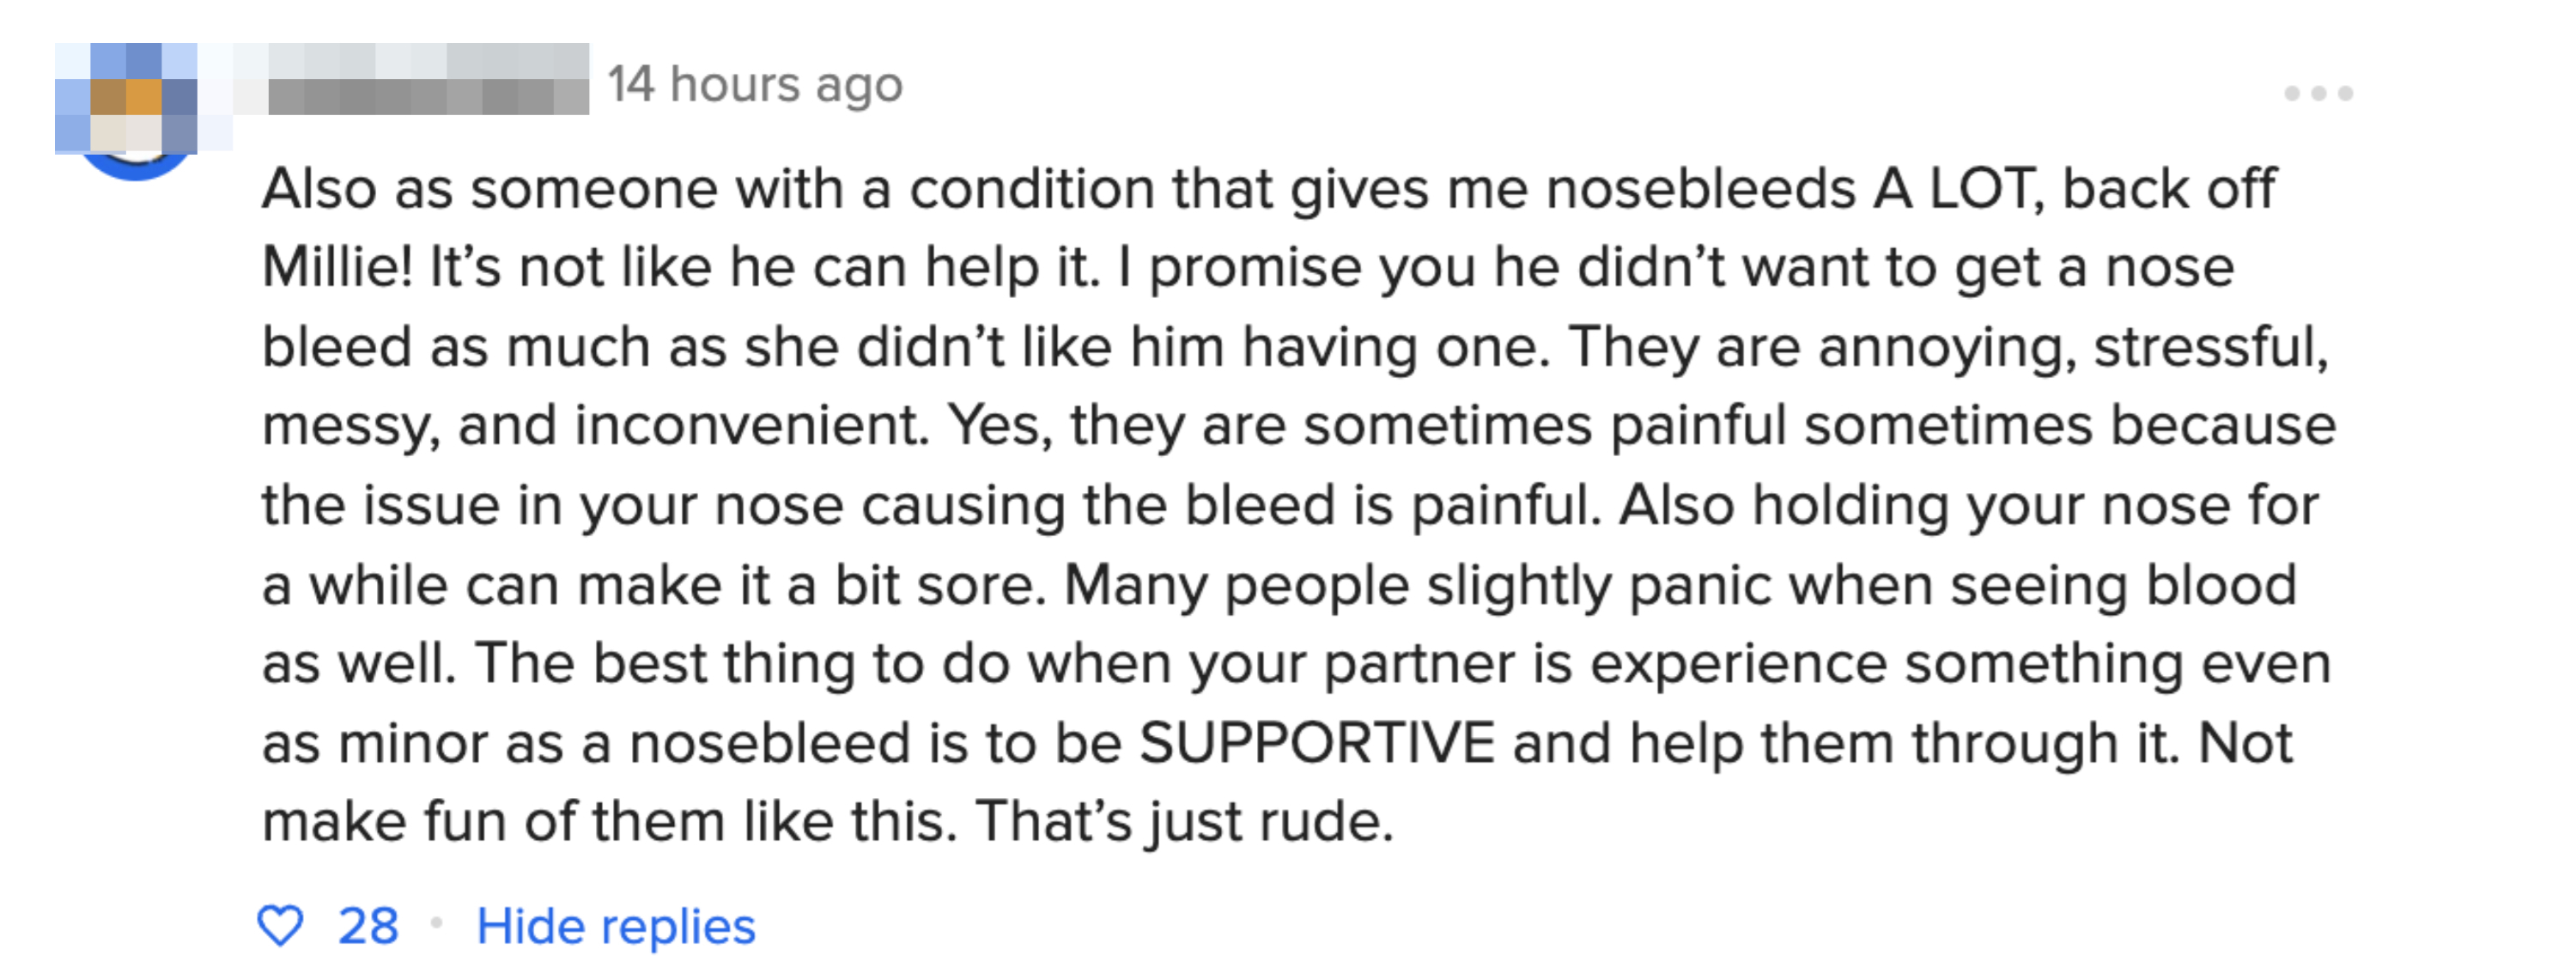 Commenter expresses frustration towards a person who dislikes nosebleeds, emphasizing the need for support during such incidents